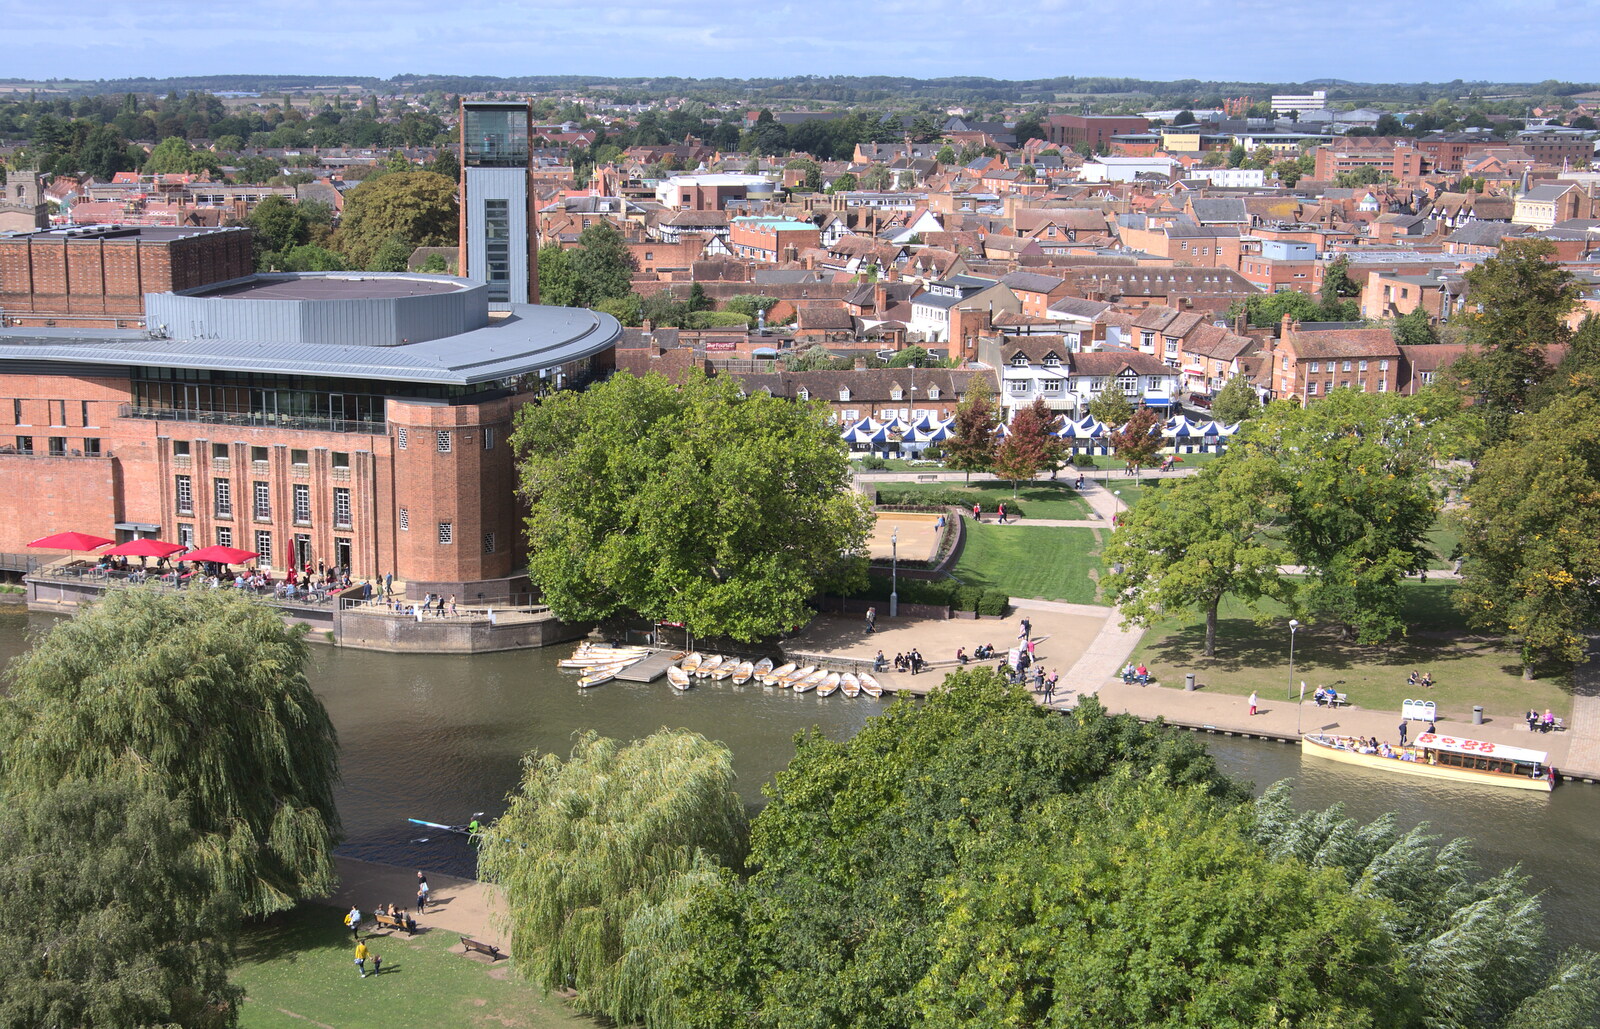 The Royal Shakespeare Company from A Postcard from Stratford-upon-Avon, Warwickshire - 9th September 2018